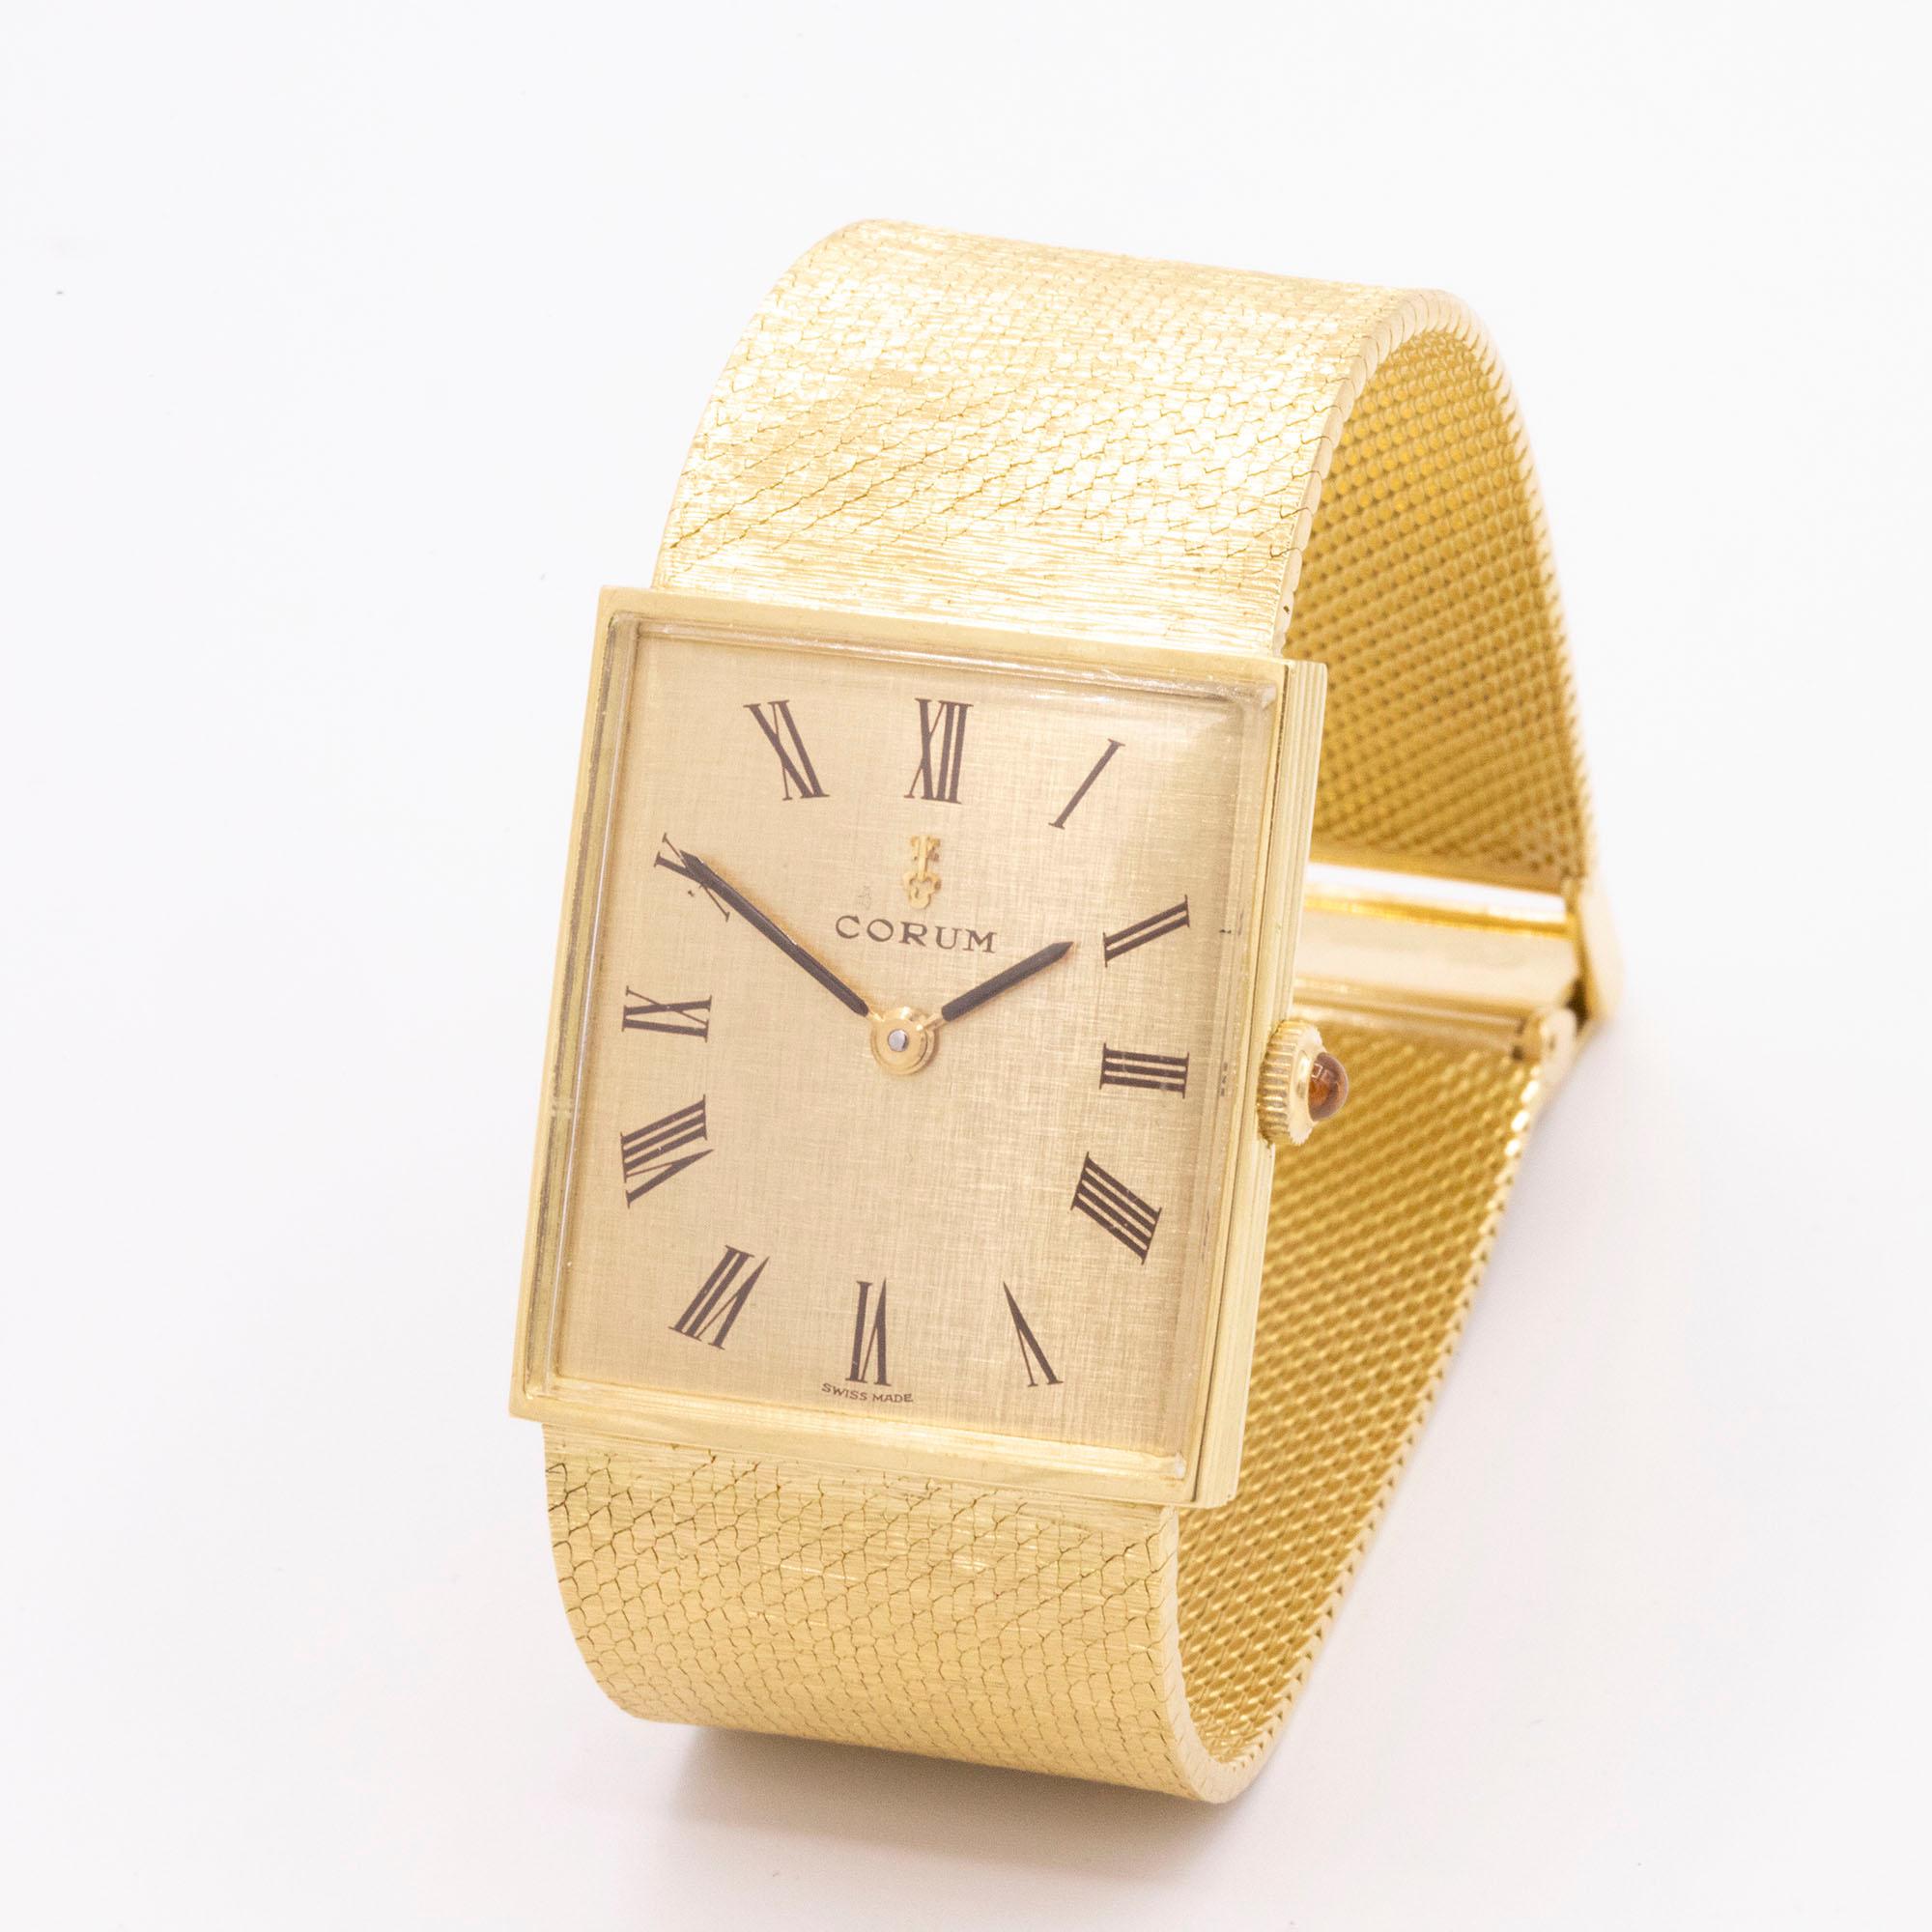 Vintage 18kt Yellow Gold Corum. The movement is mechanical and this timepiece is manually wound. The case is square and has a beautiful champagne roman numeral dial. The gold mesh bracelet has a signature Corum clasp. Hallmarked numbers 57165 &